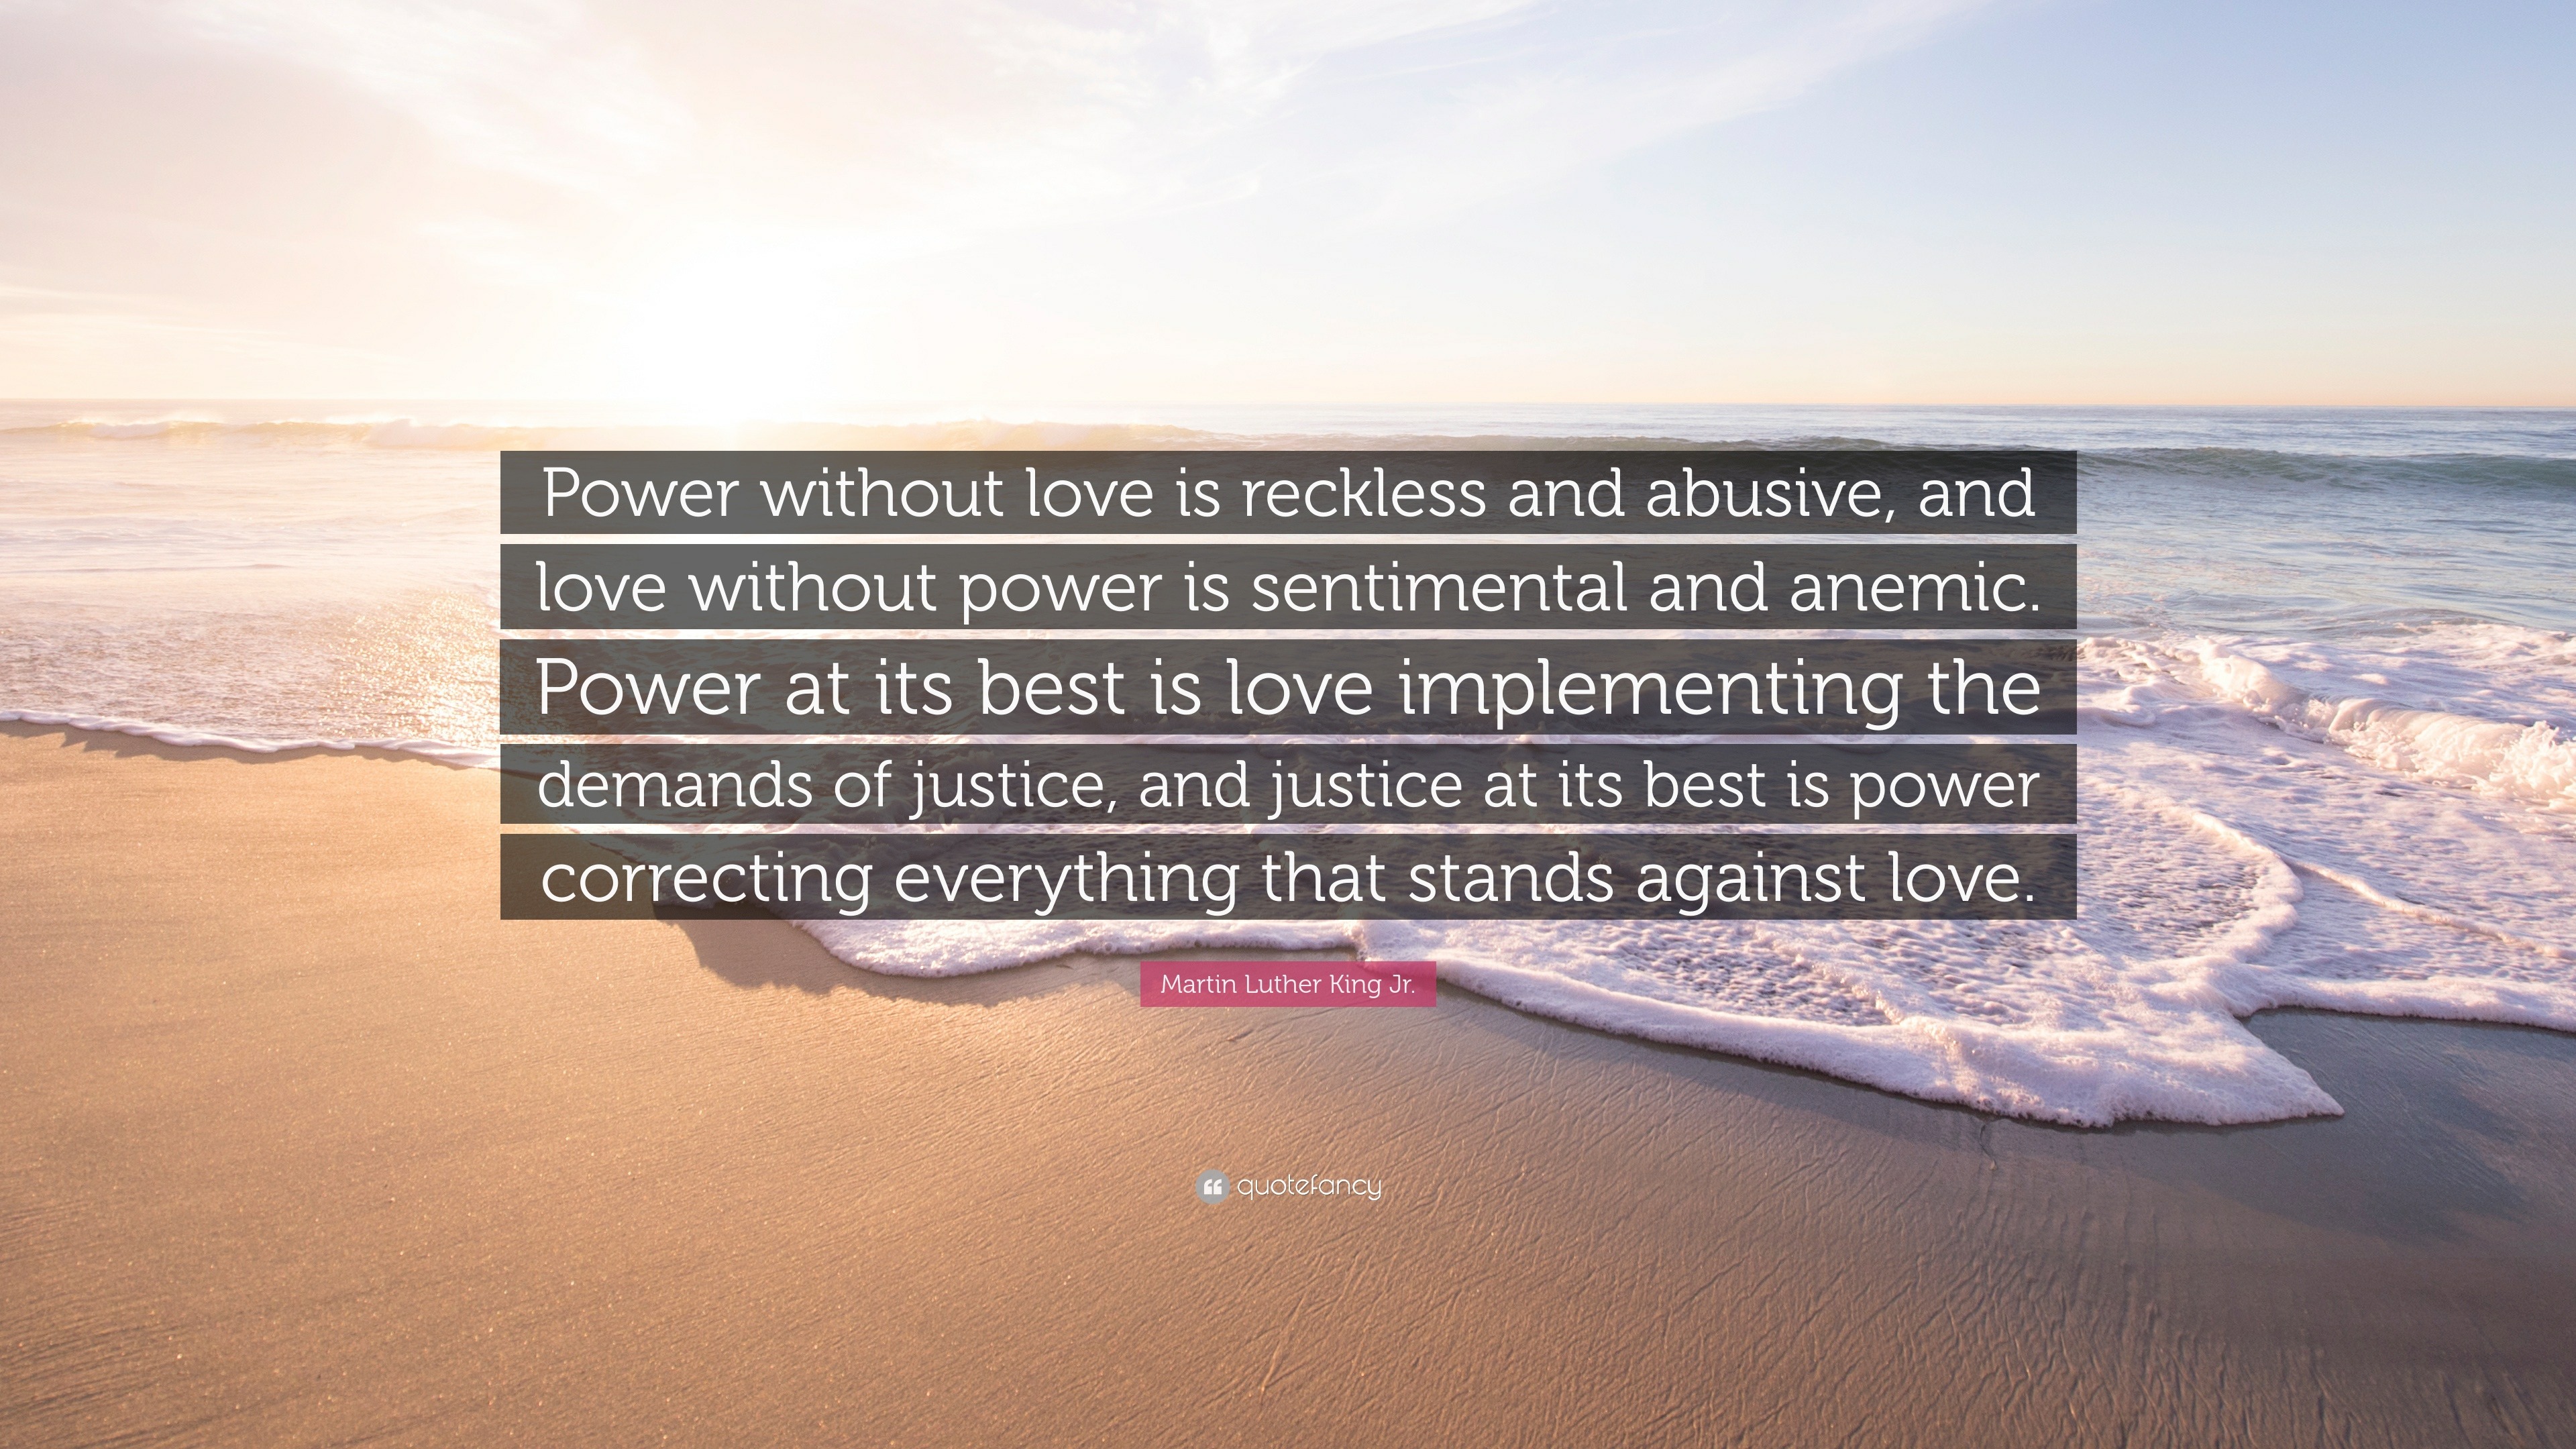 Martin Luther King Jr Quote “Power without love is reckless and abusive